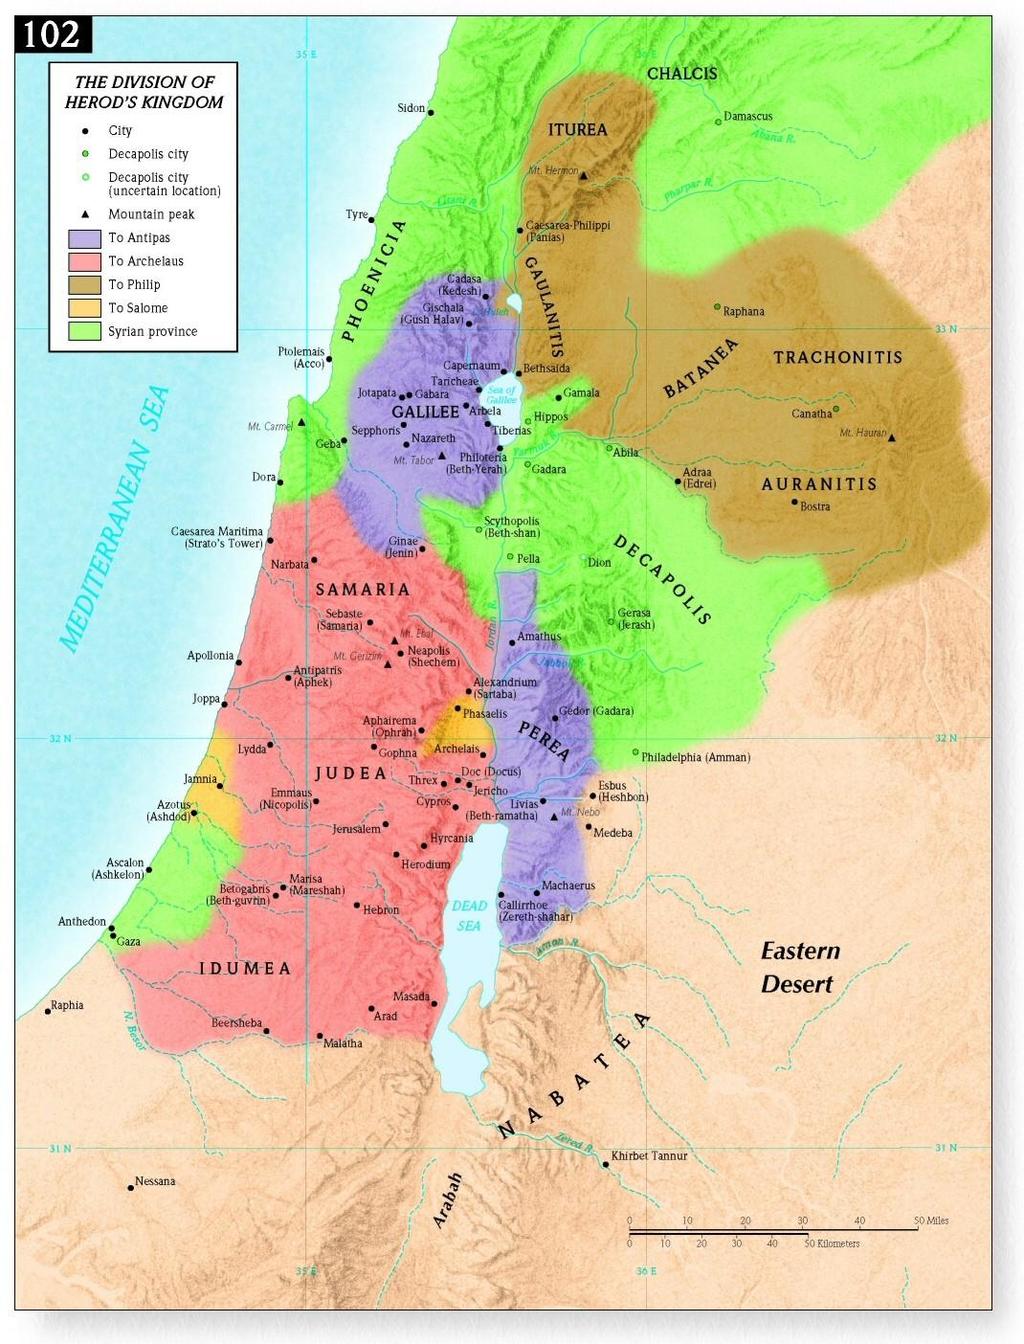 Samaria was part of the territory controlled by the Roman governor of